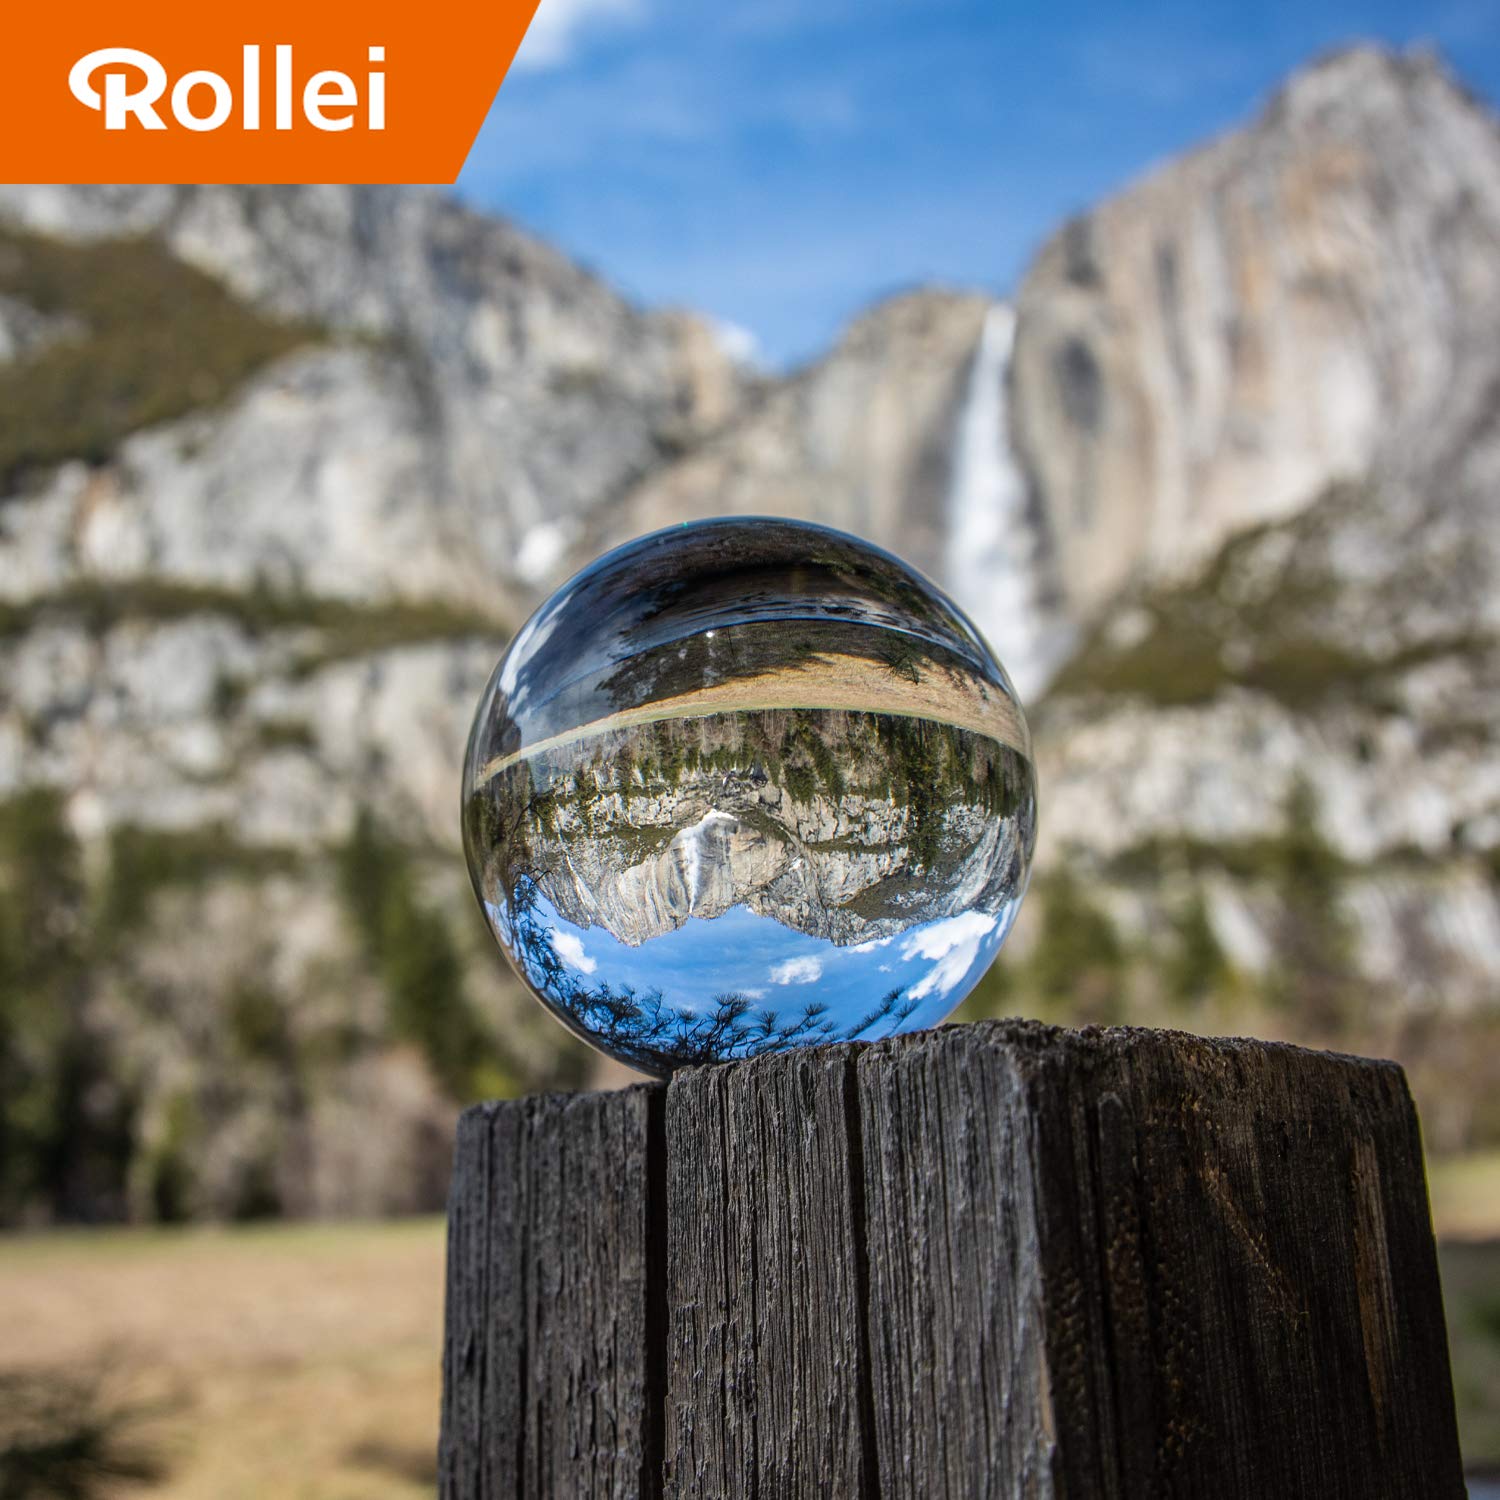 Using a Lensball for Photography. Every so often photography goes through…  | by Darren Coleshill | Medium